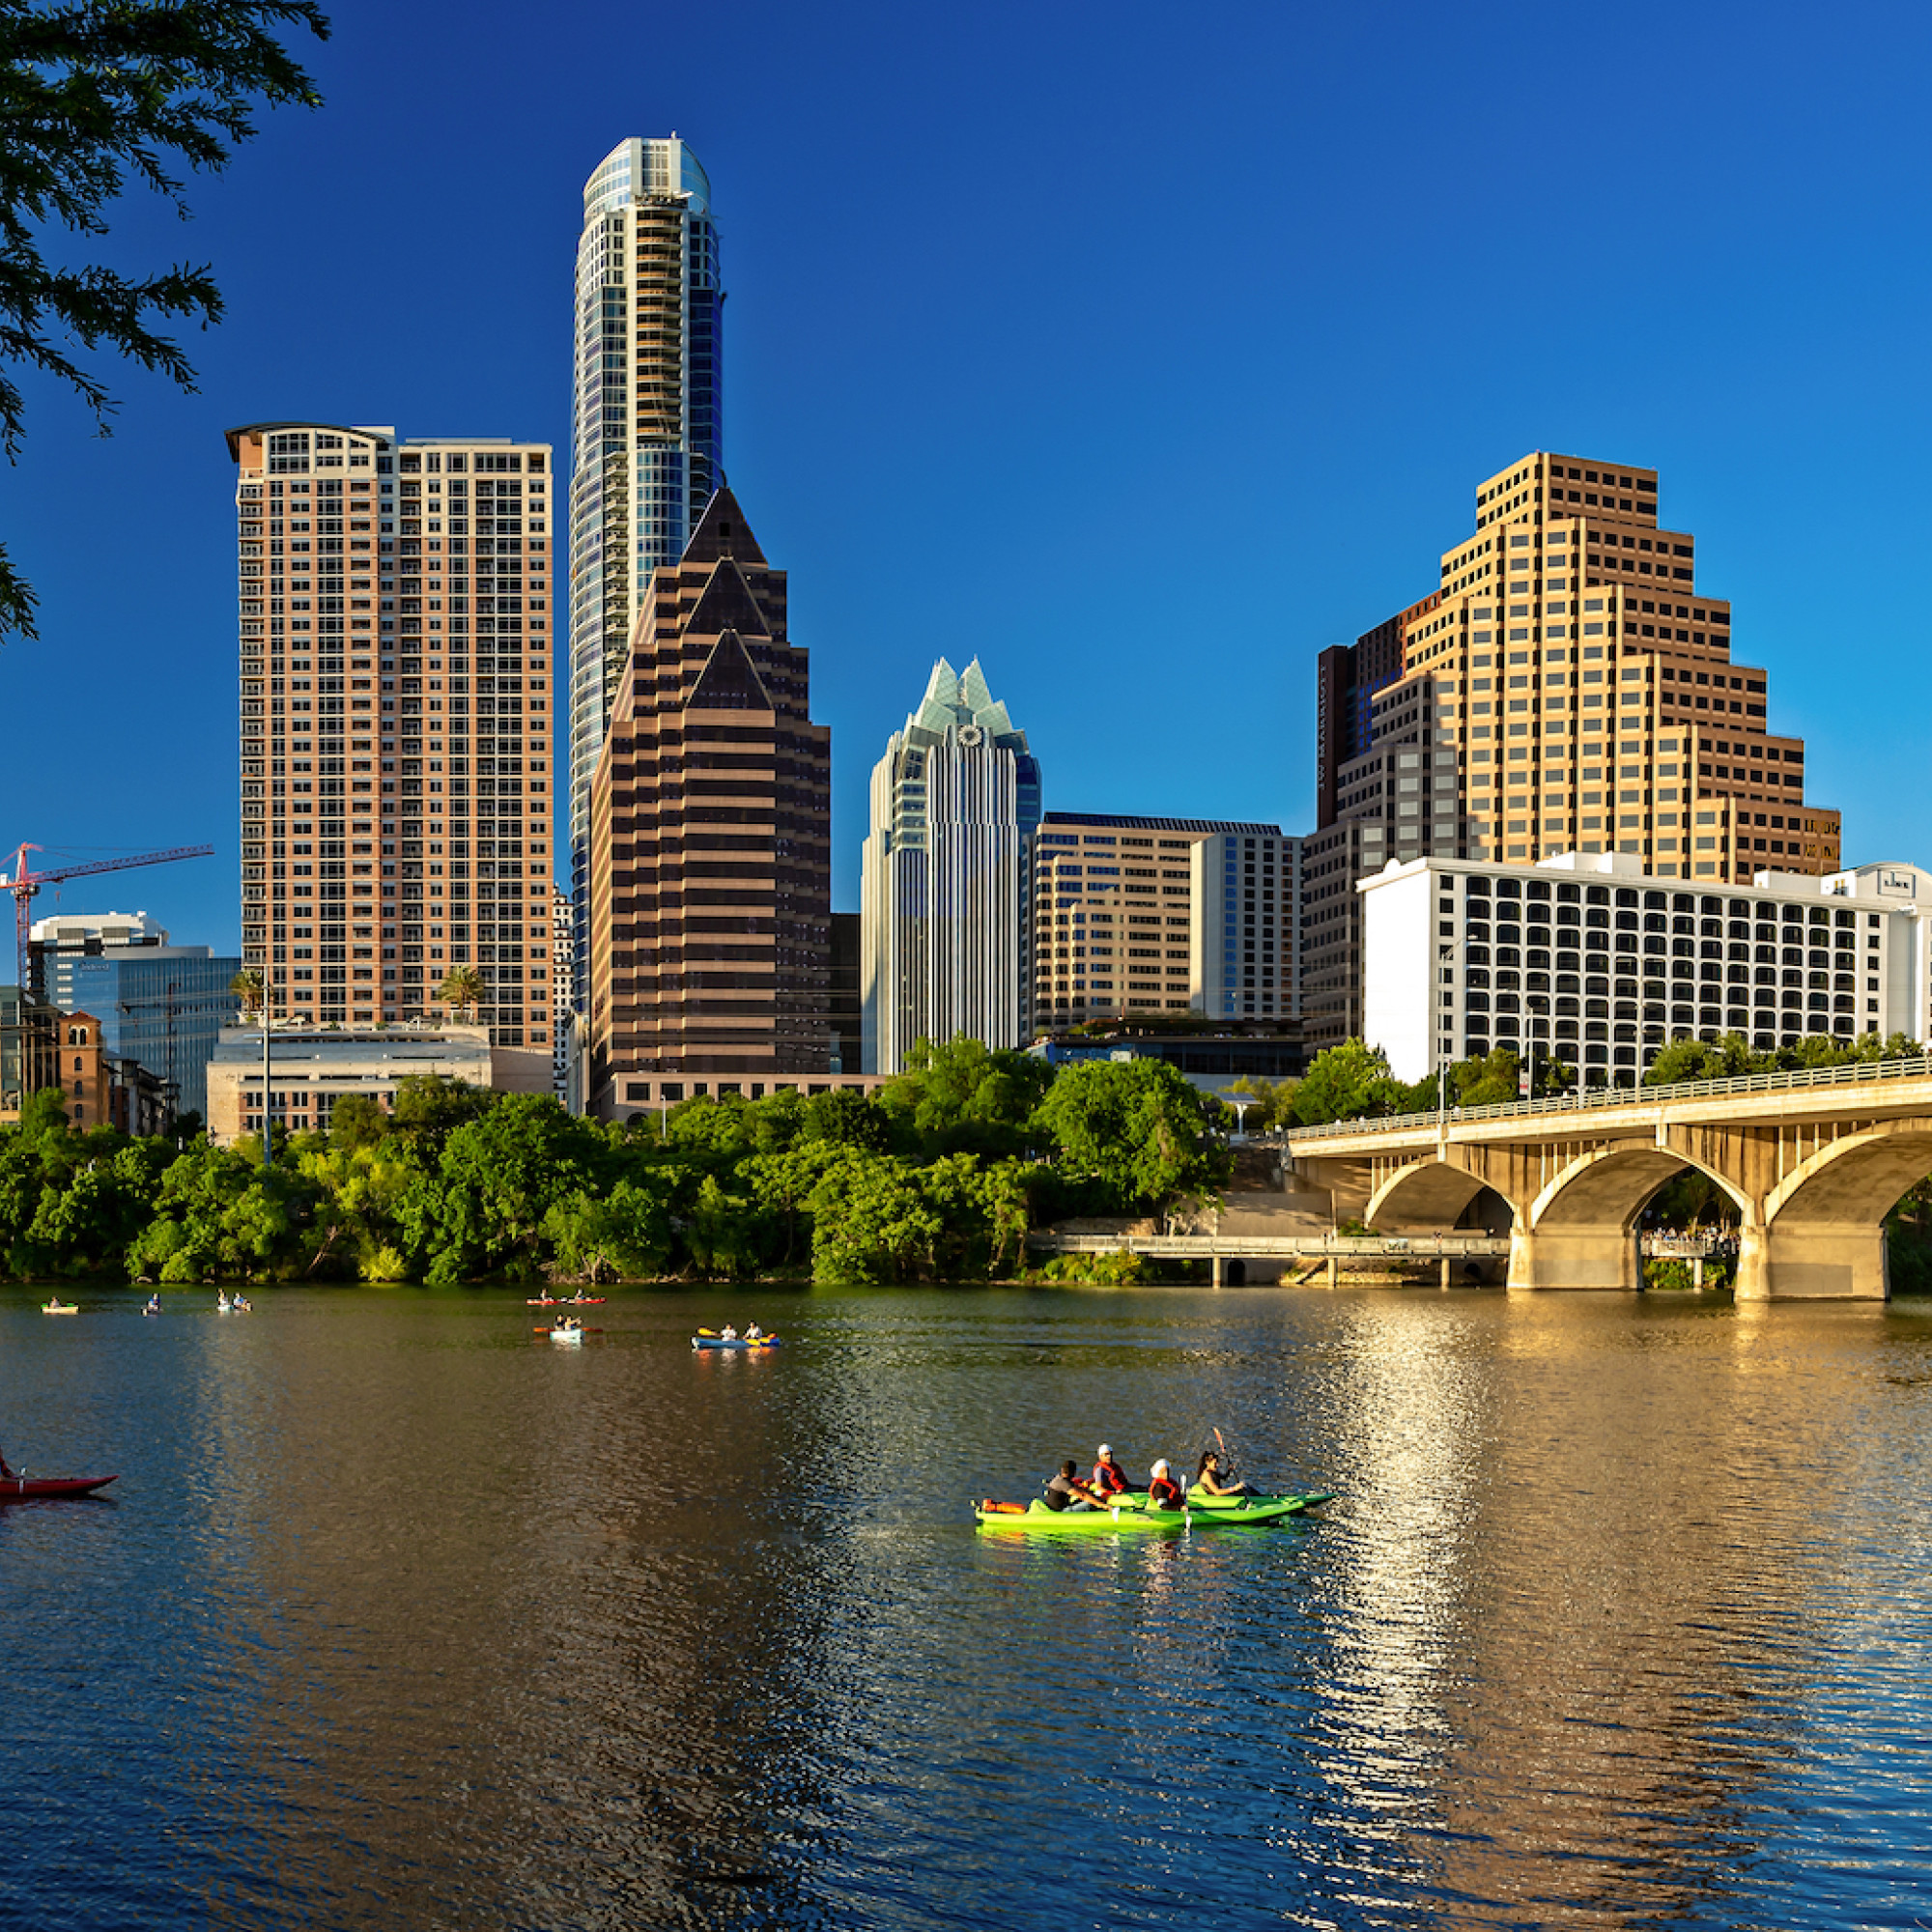 View of downtown buildings across from a lake with canoes in the water